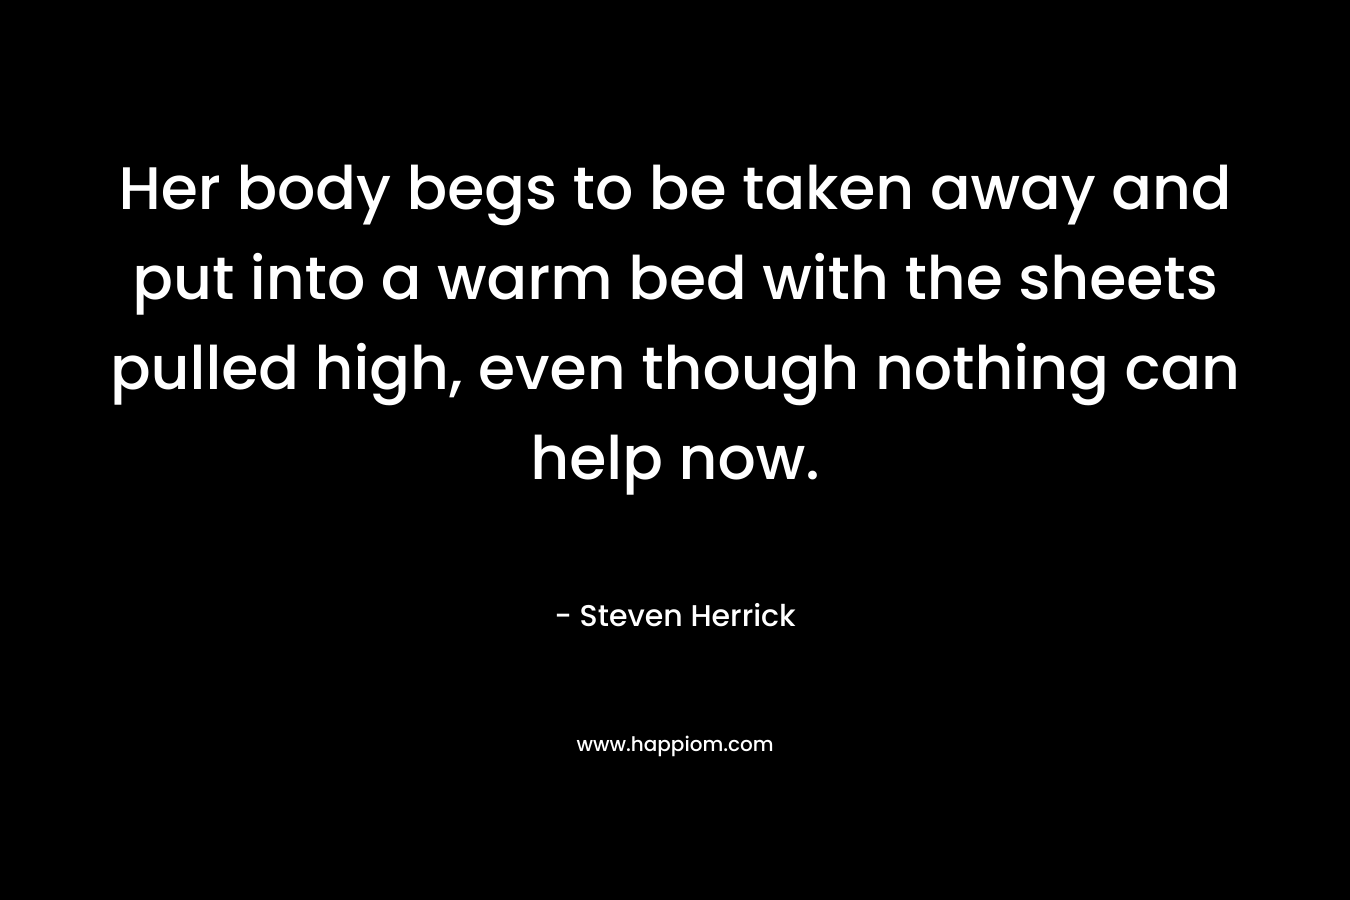 Her body begs to be taken away and put into a warm bed with the sheets pulled high, even though nothing can help now. – Steven Herrick